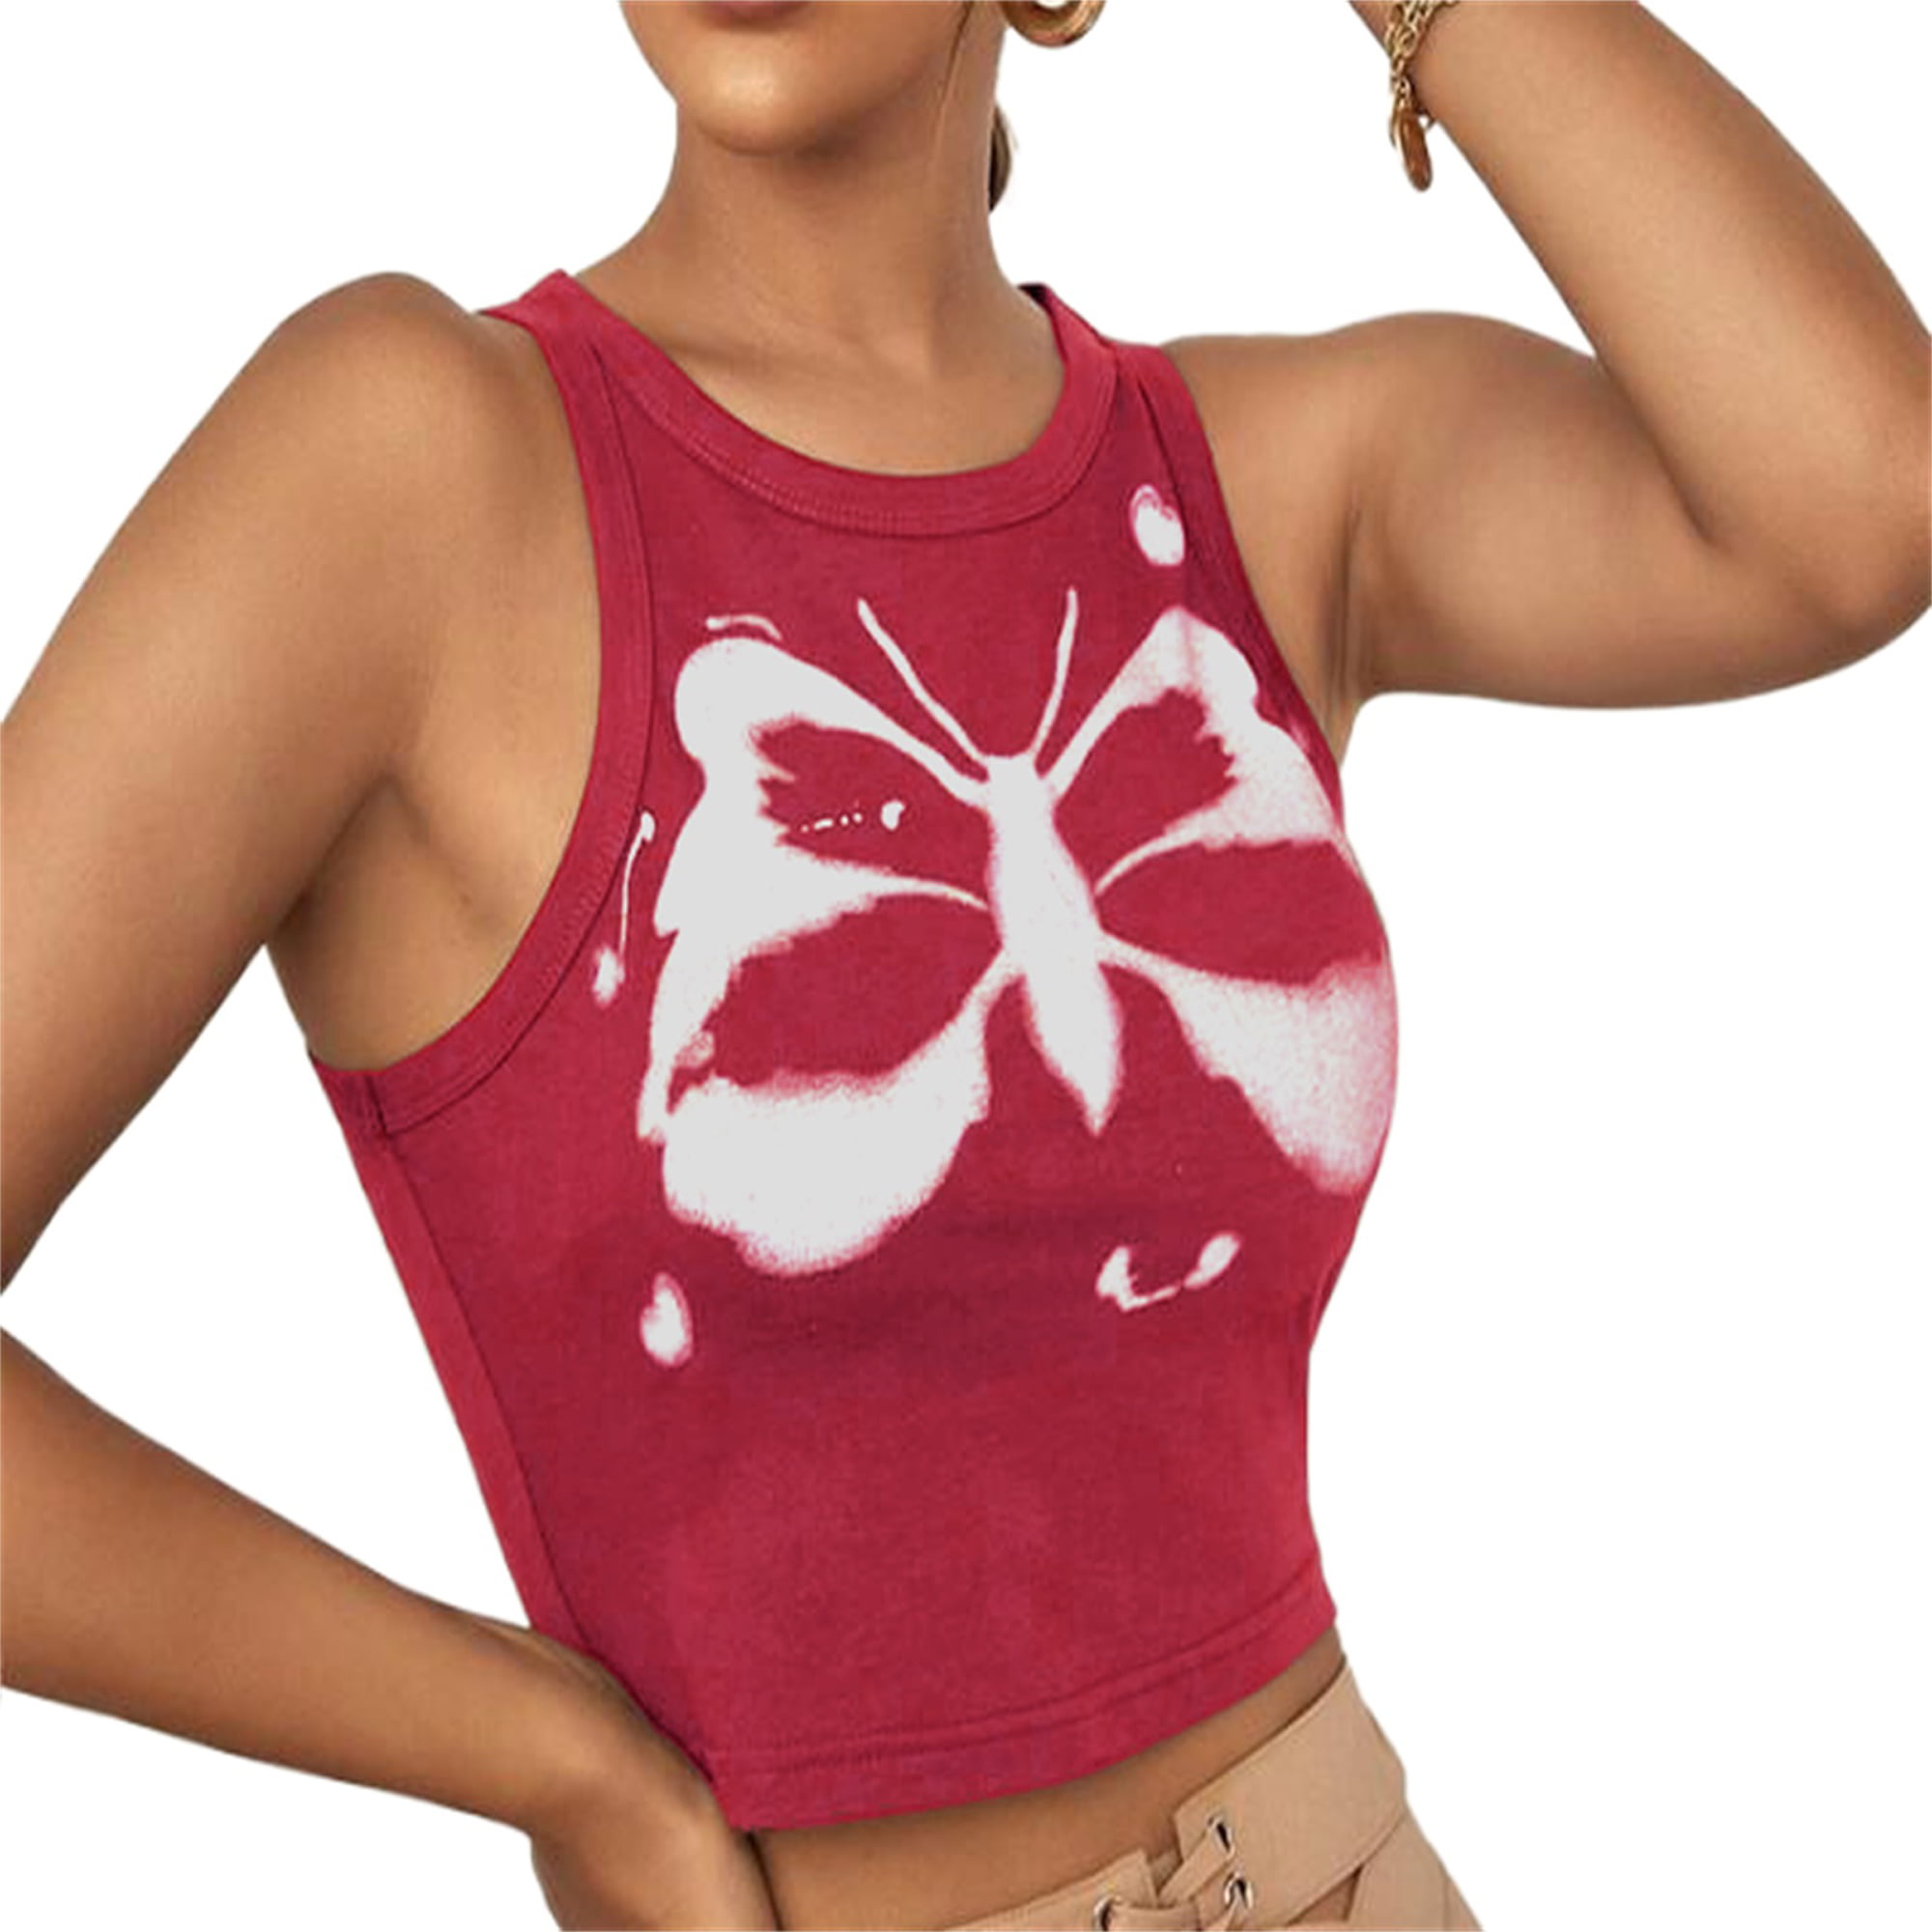 Slim Fit Camisole Strappy Swing Top Cami Vest Muscle Tanks Butterfly Sleeveless Shirts Workout Tank Tops for Women